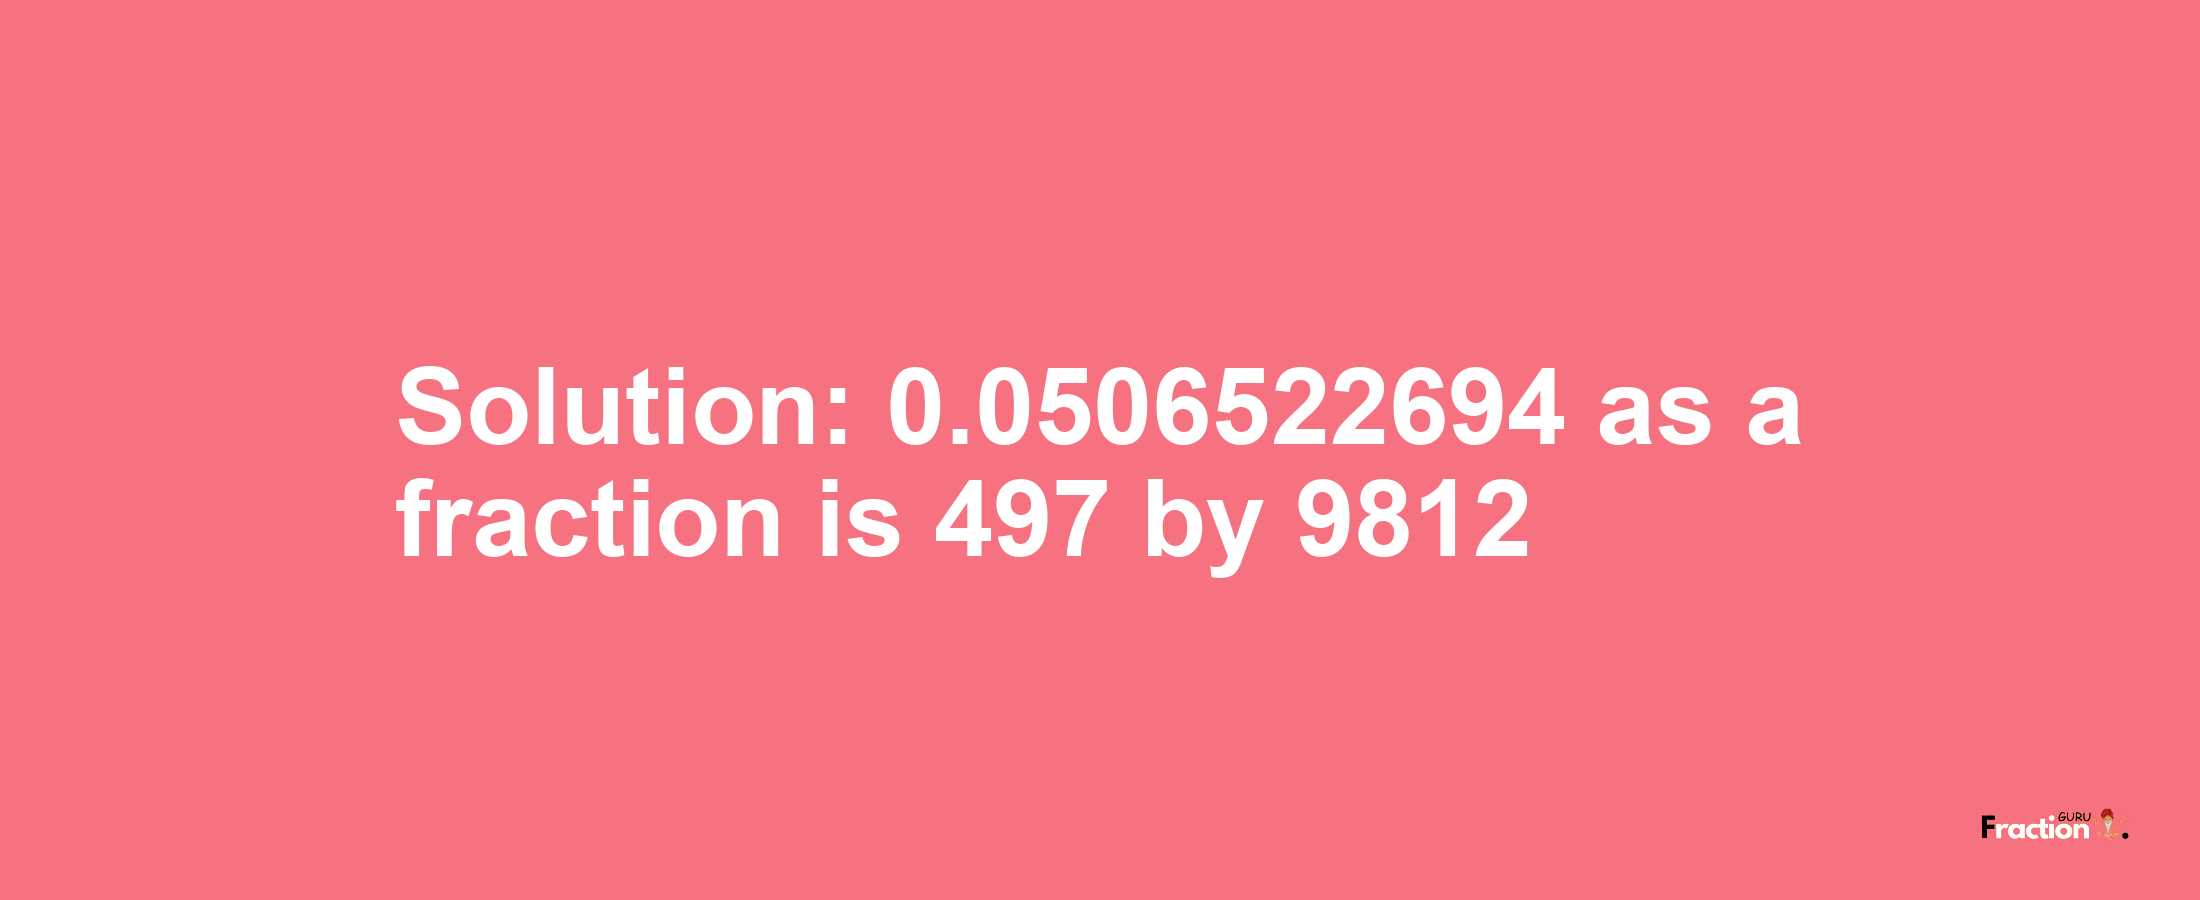 Solution:0.0506522694 as a fraction is 497/9812